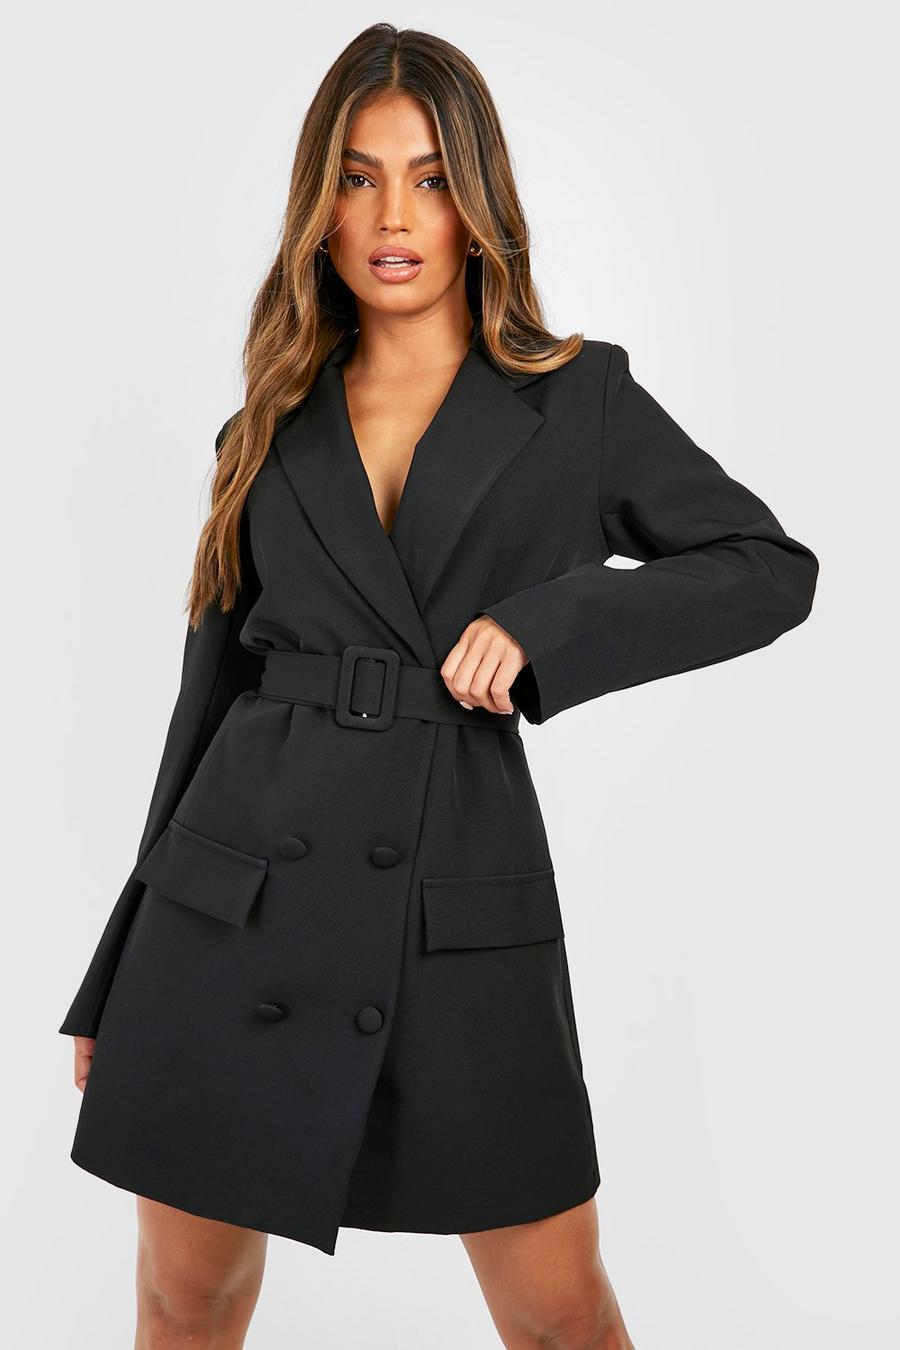 Black Double Breasted Belted Blazer Dress